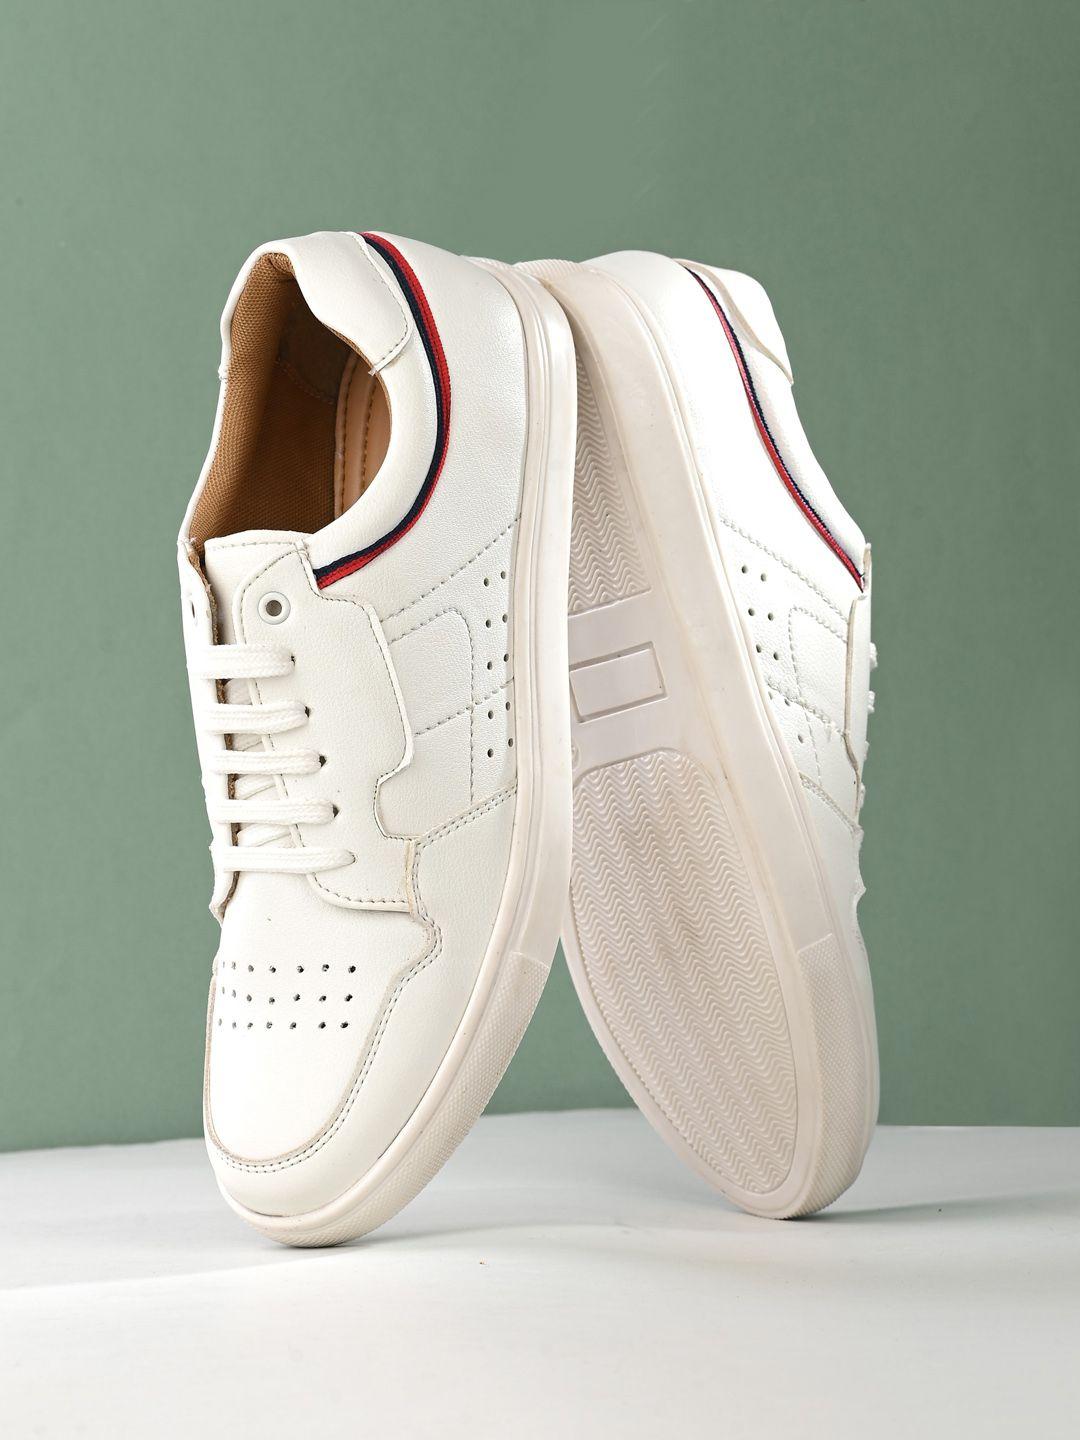 the roadster co. men perforated lightweight sneakers